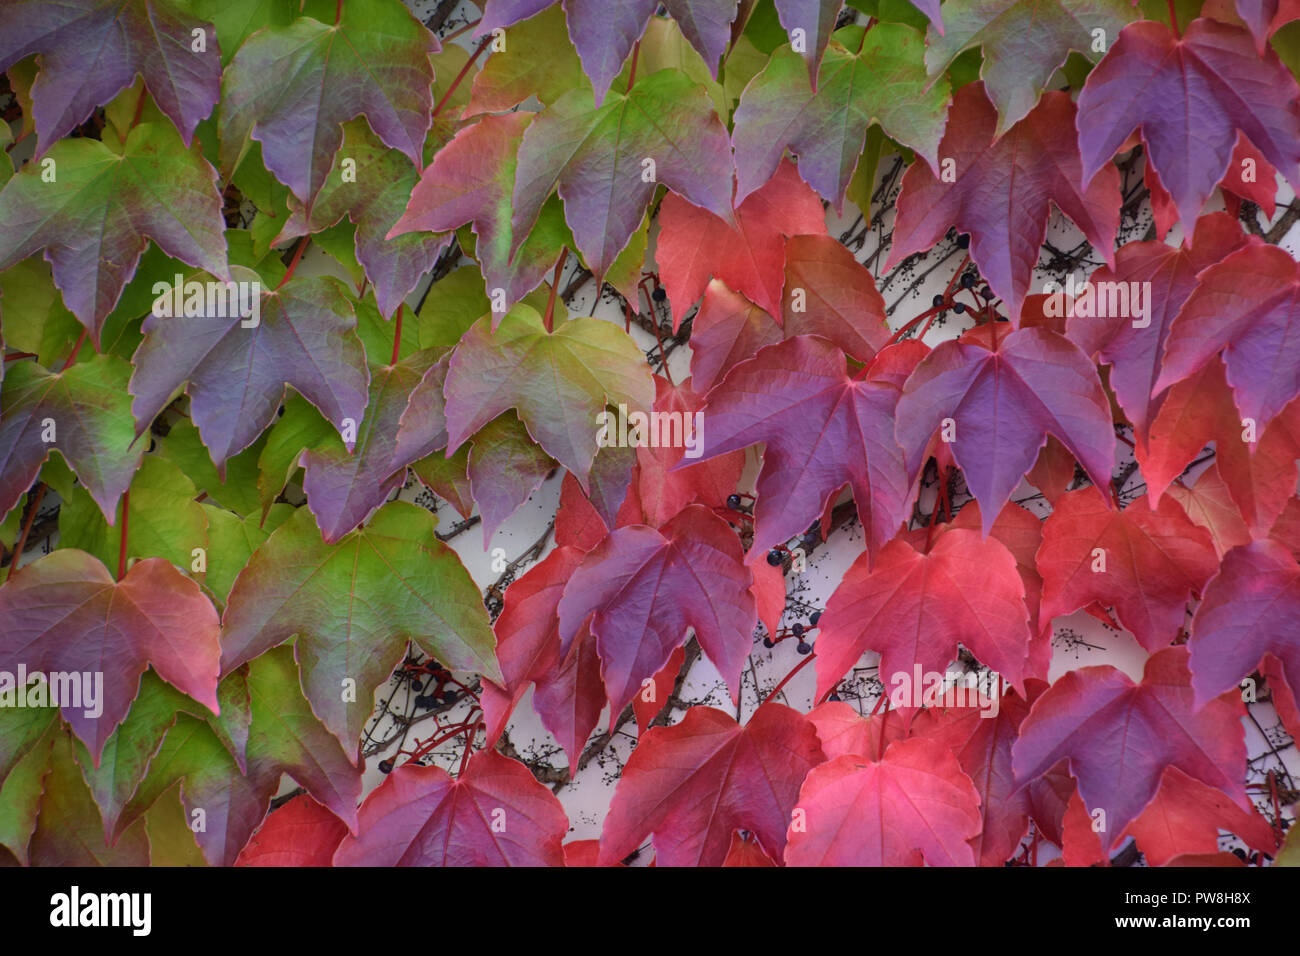 multicolored ivy leaves background, autumn colorful hedera helix climbing on a concrete wall Stock Photo